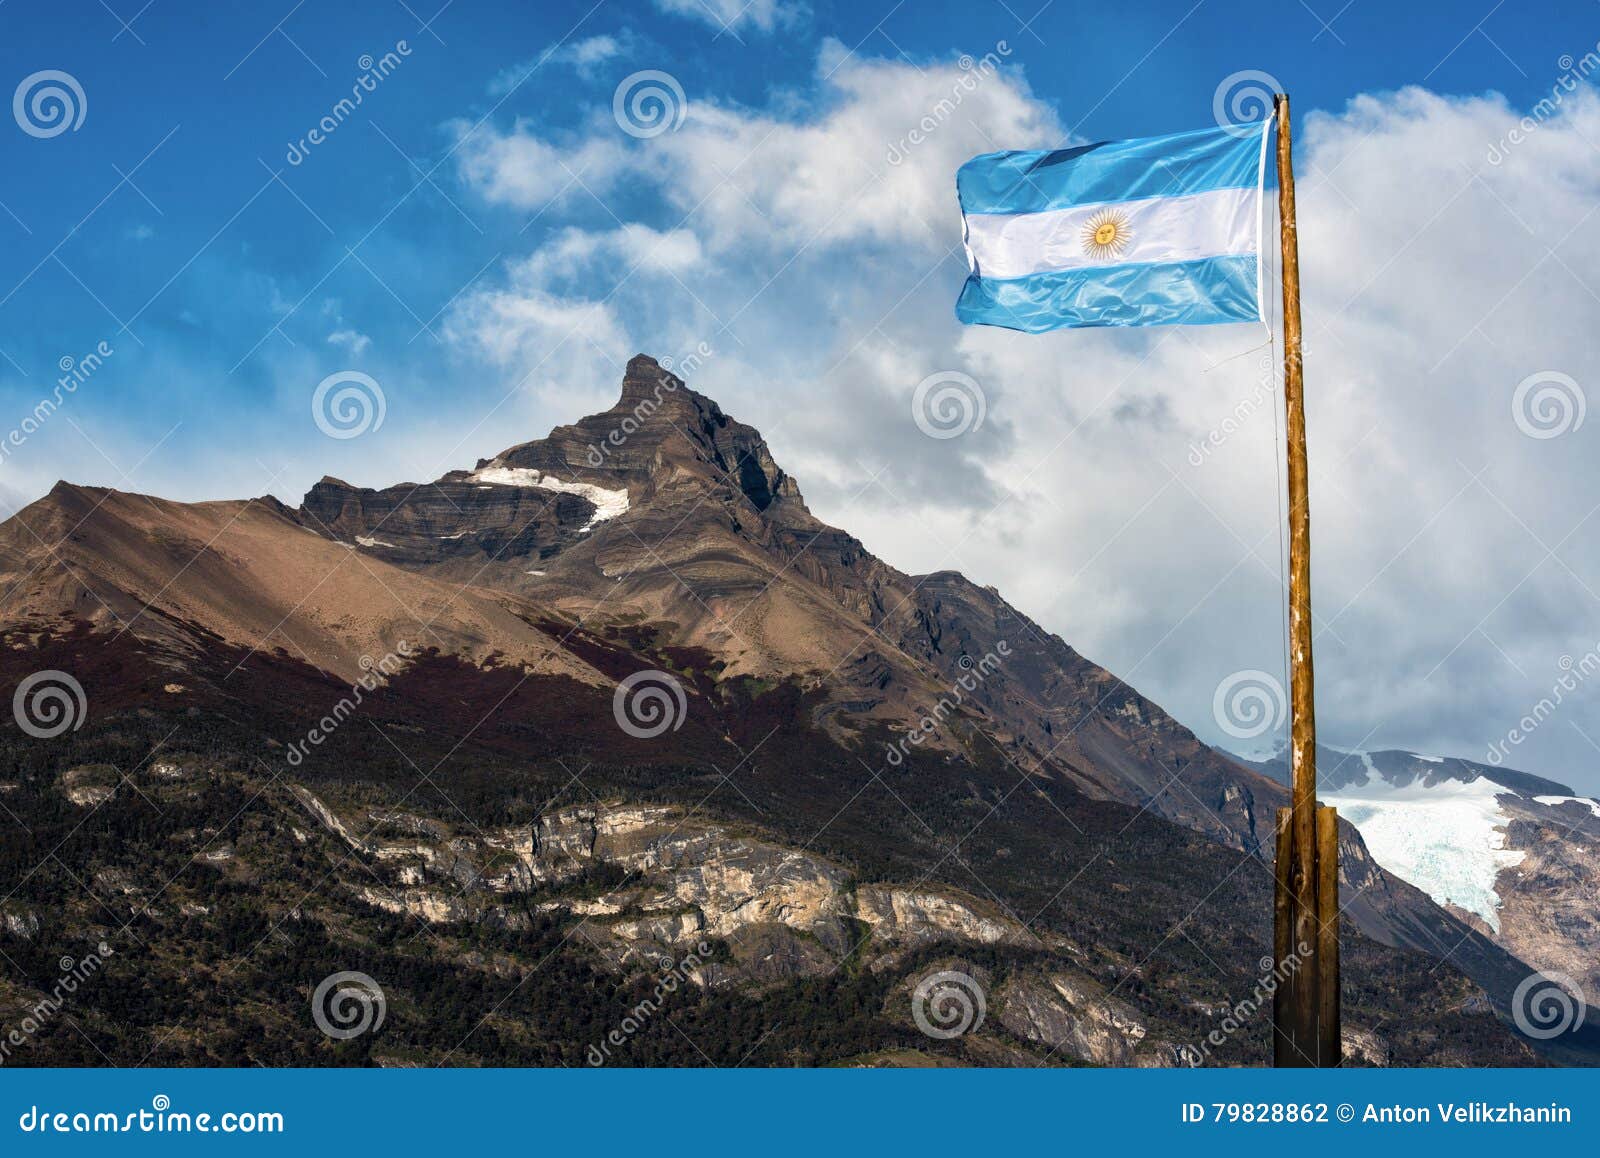 argentine flag flying in front of the mountain